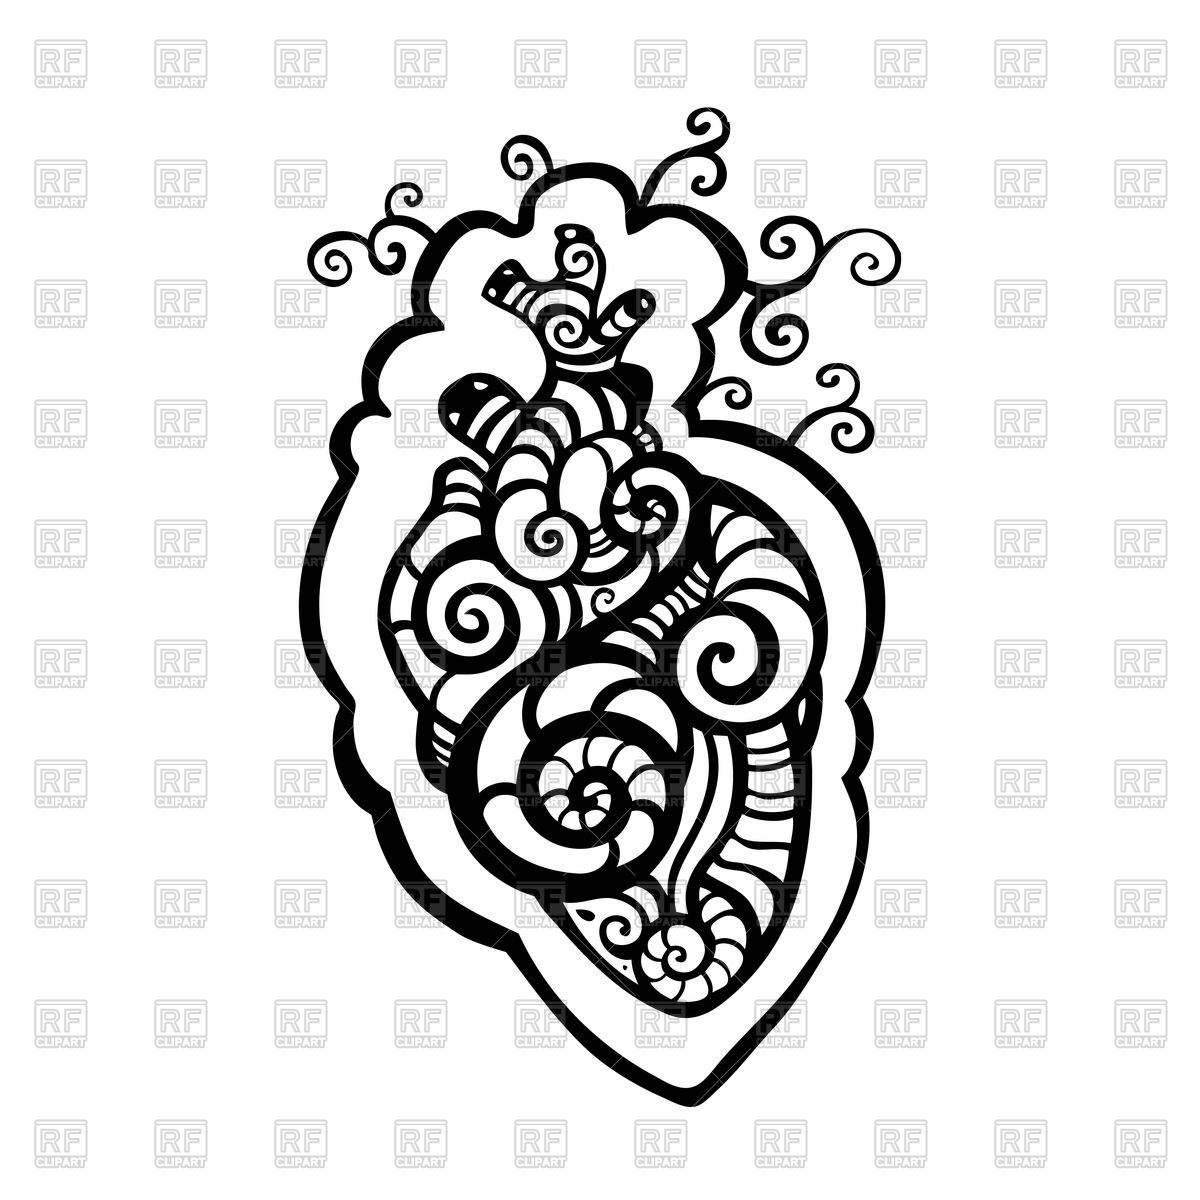 Decorative Heart 51489 Download Royalty Free Vector Clipart  Eps